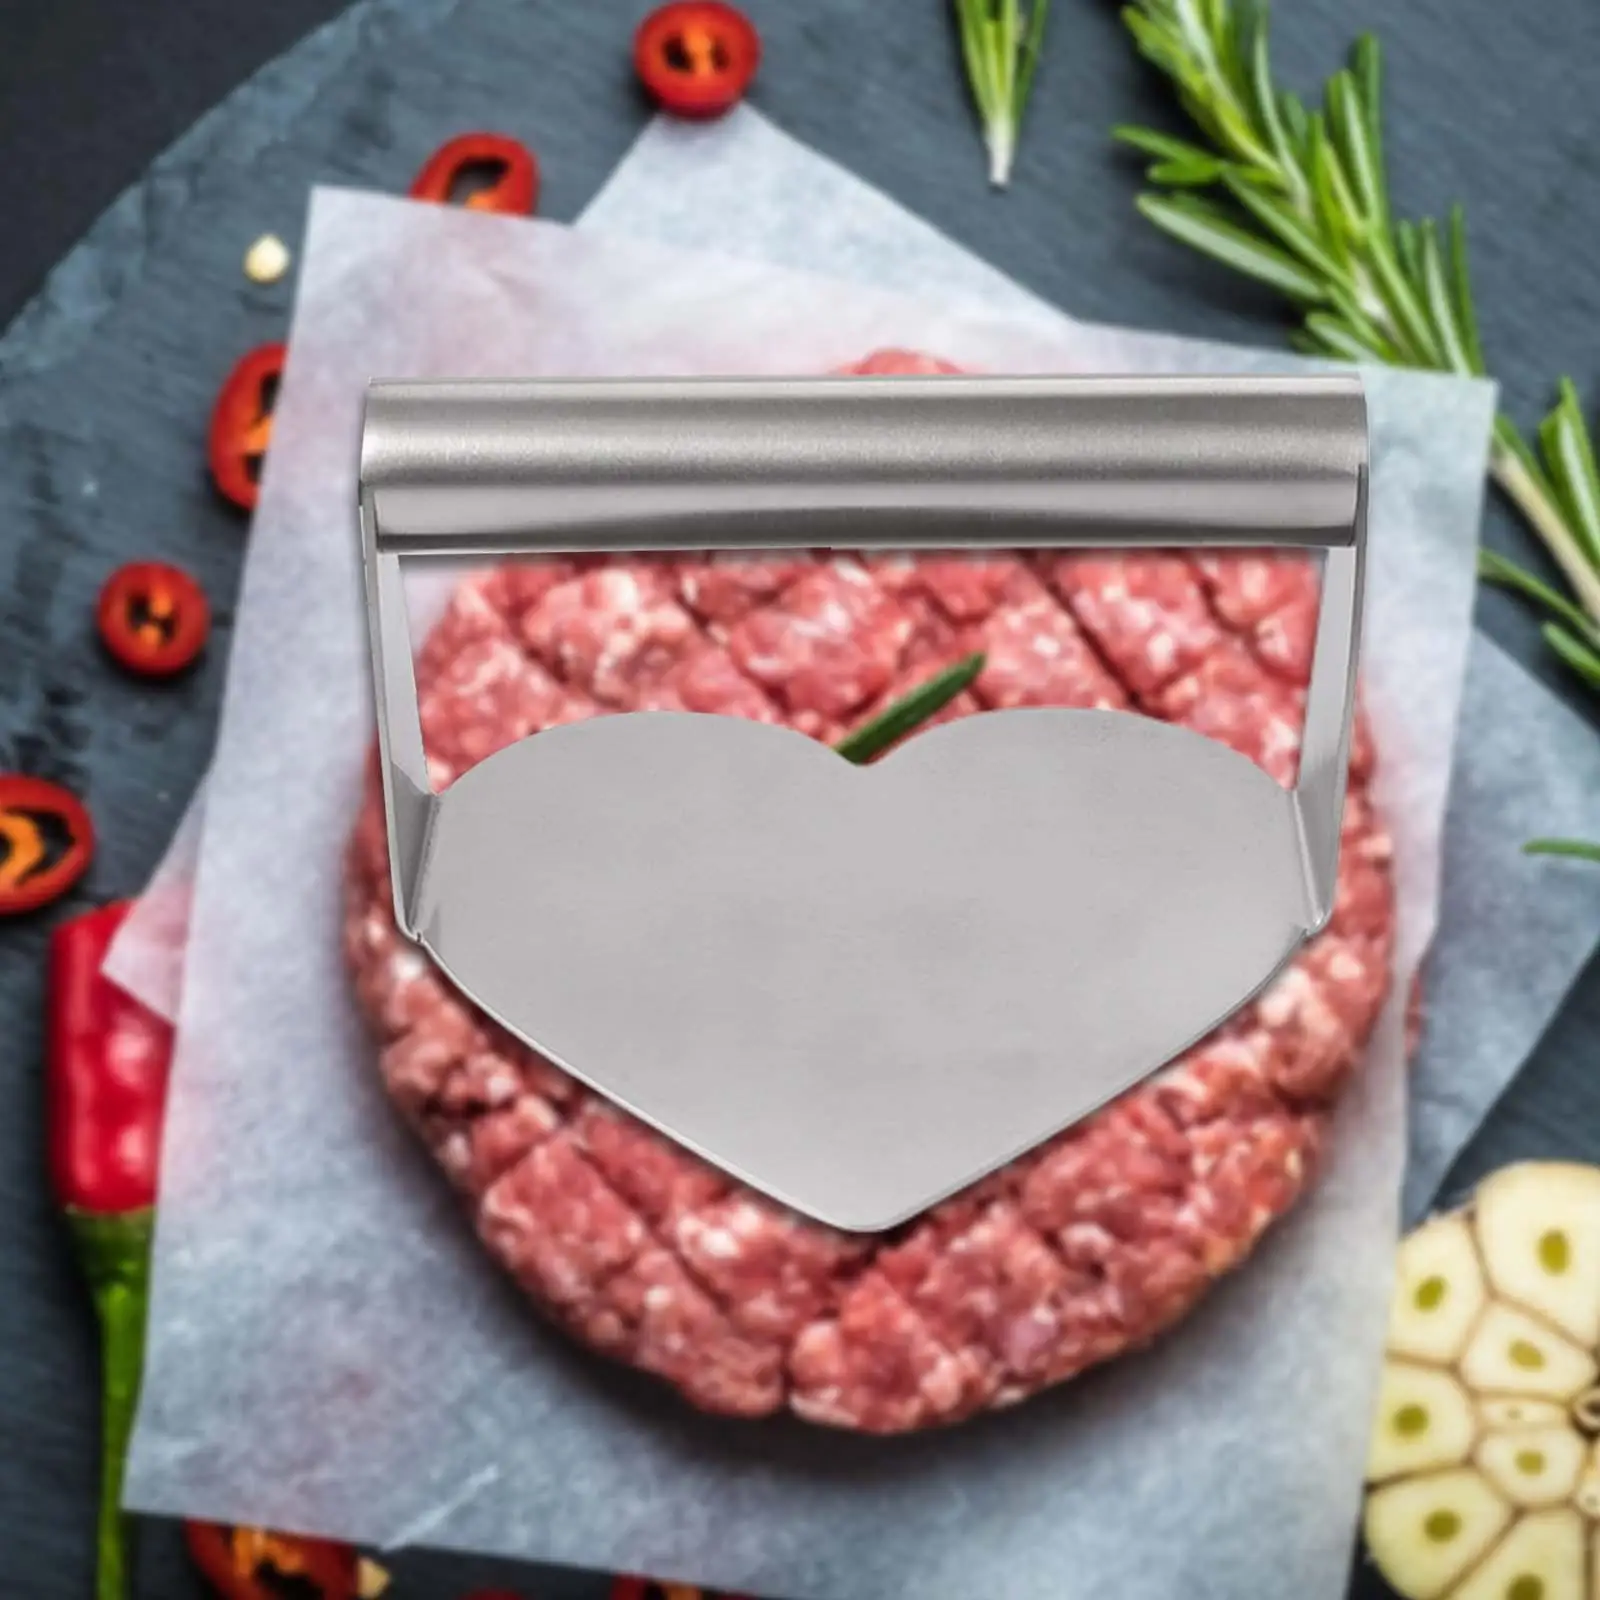 Stainless Steel Grill Press, Hamburger Press, BBQ Accessories, Heart Shaped for